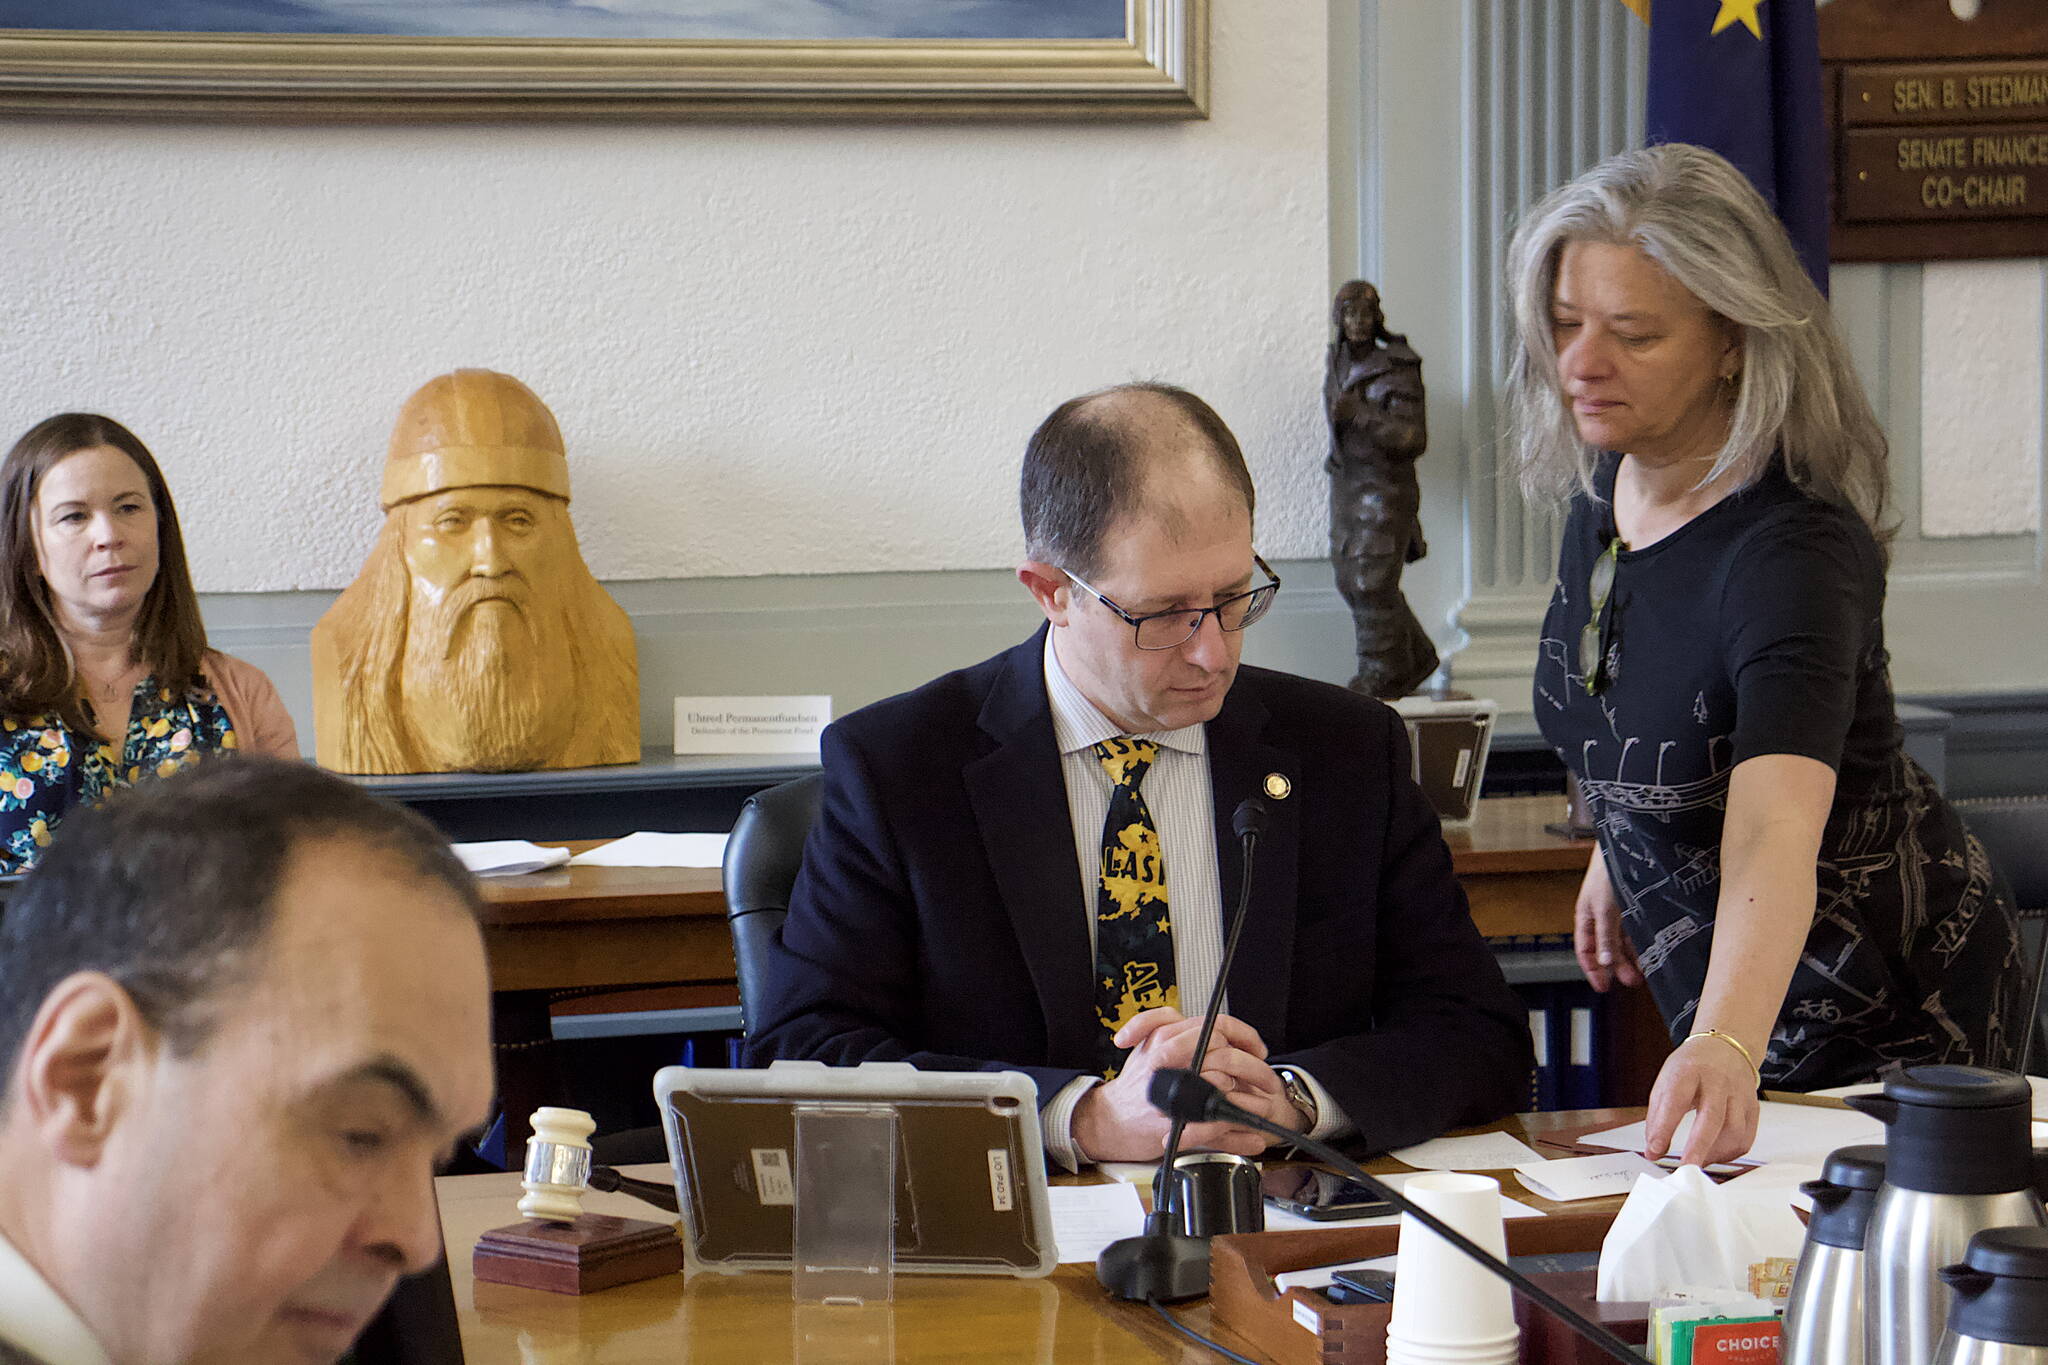 State Sen. Jesse Kiehl, D-Juneau, receives a note while presiding over public testimony from Juneau residents about next year’s proposed state budget during a Senate Finance Committee meeting Thursday. (Mark Sabbatini / Juneau Empire)